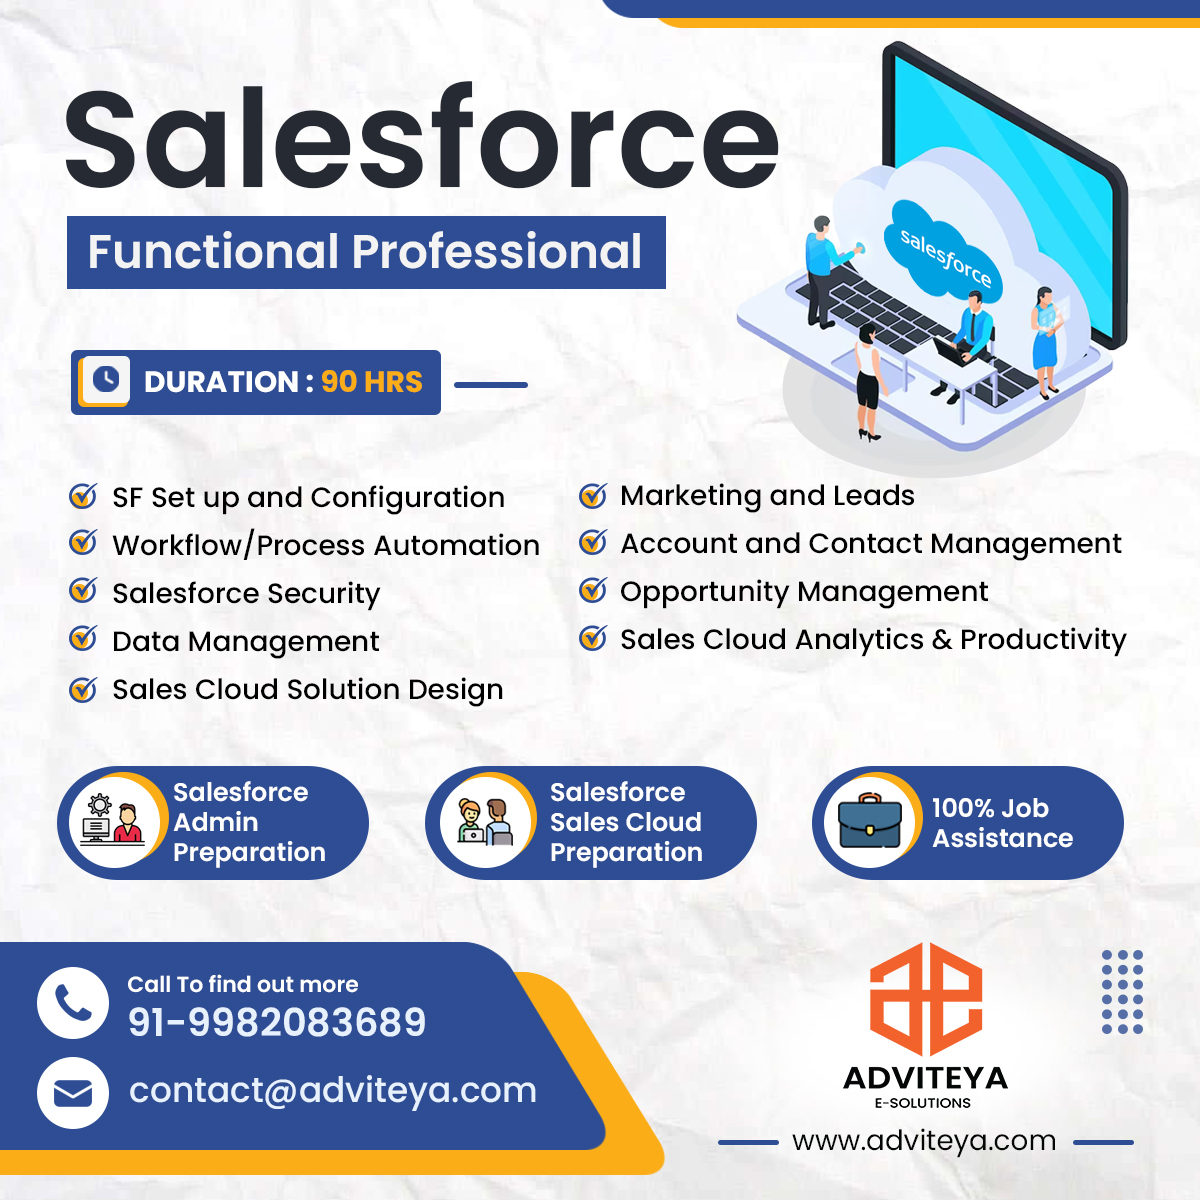 🚀 Elevate Your Career with Our Salesforce Functional Professional Course! 🚀

Visit now: adviteya.com

#SalesforceFunctionalPro#SalesforceCourse#SalesforceTraining#SalesforceAdmin#SalesCloud#CRMTraining#SalesforceCertification#SalesforceCareer#SalesforceJobs